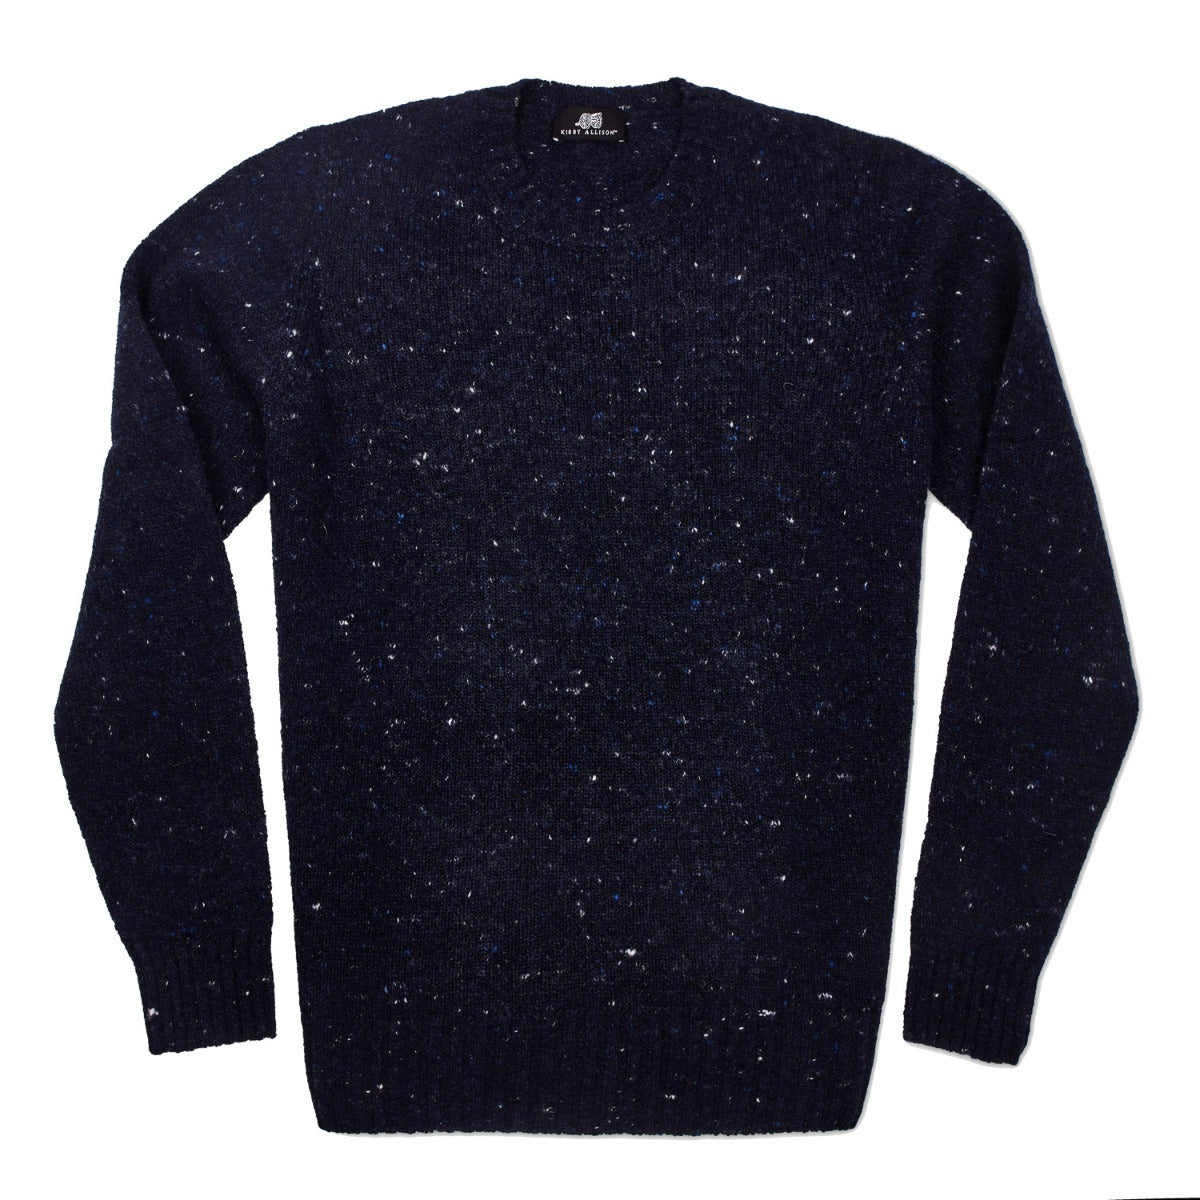 Sovereign Grade Blue Donegal Crew Neck Sweater